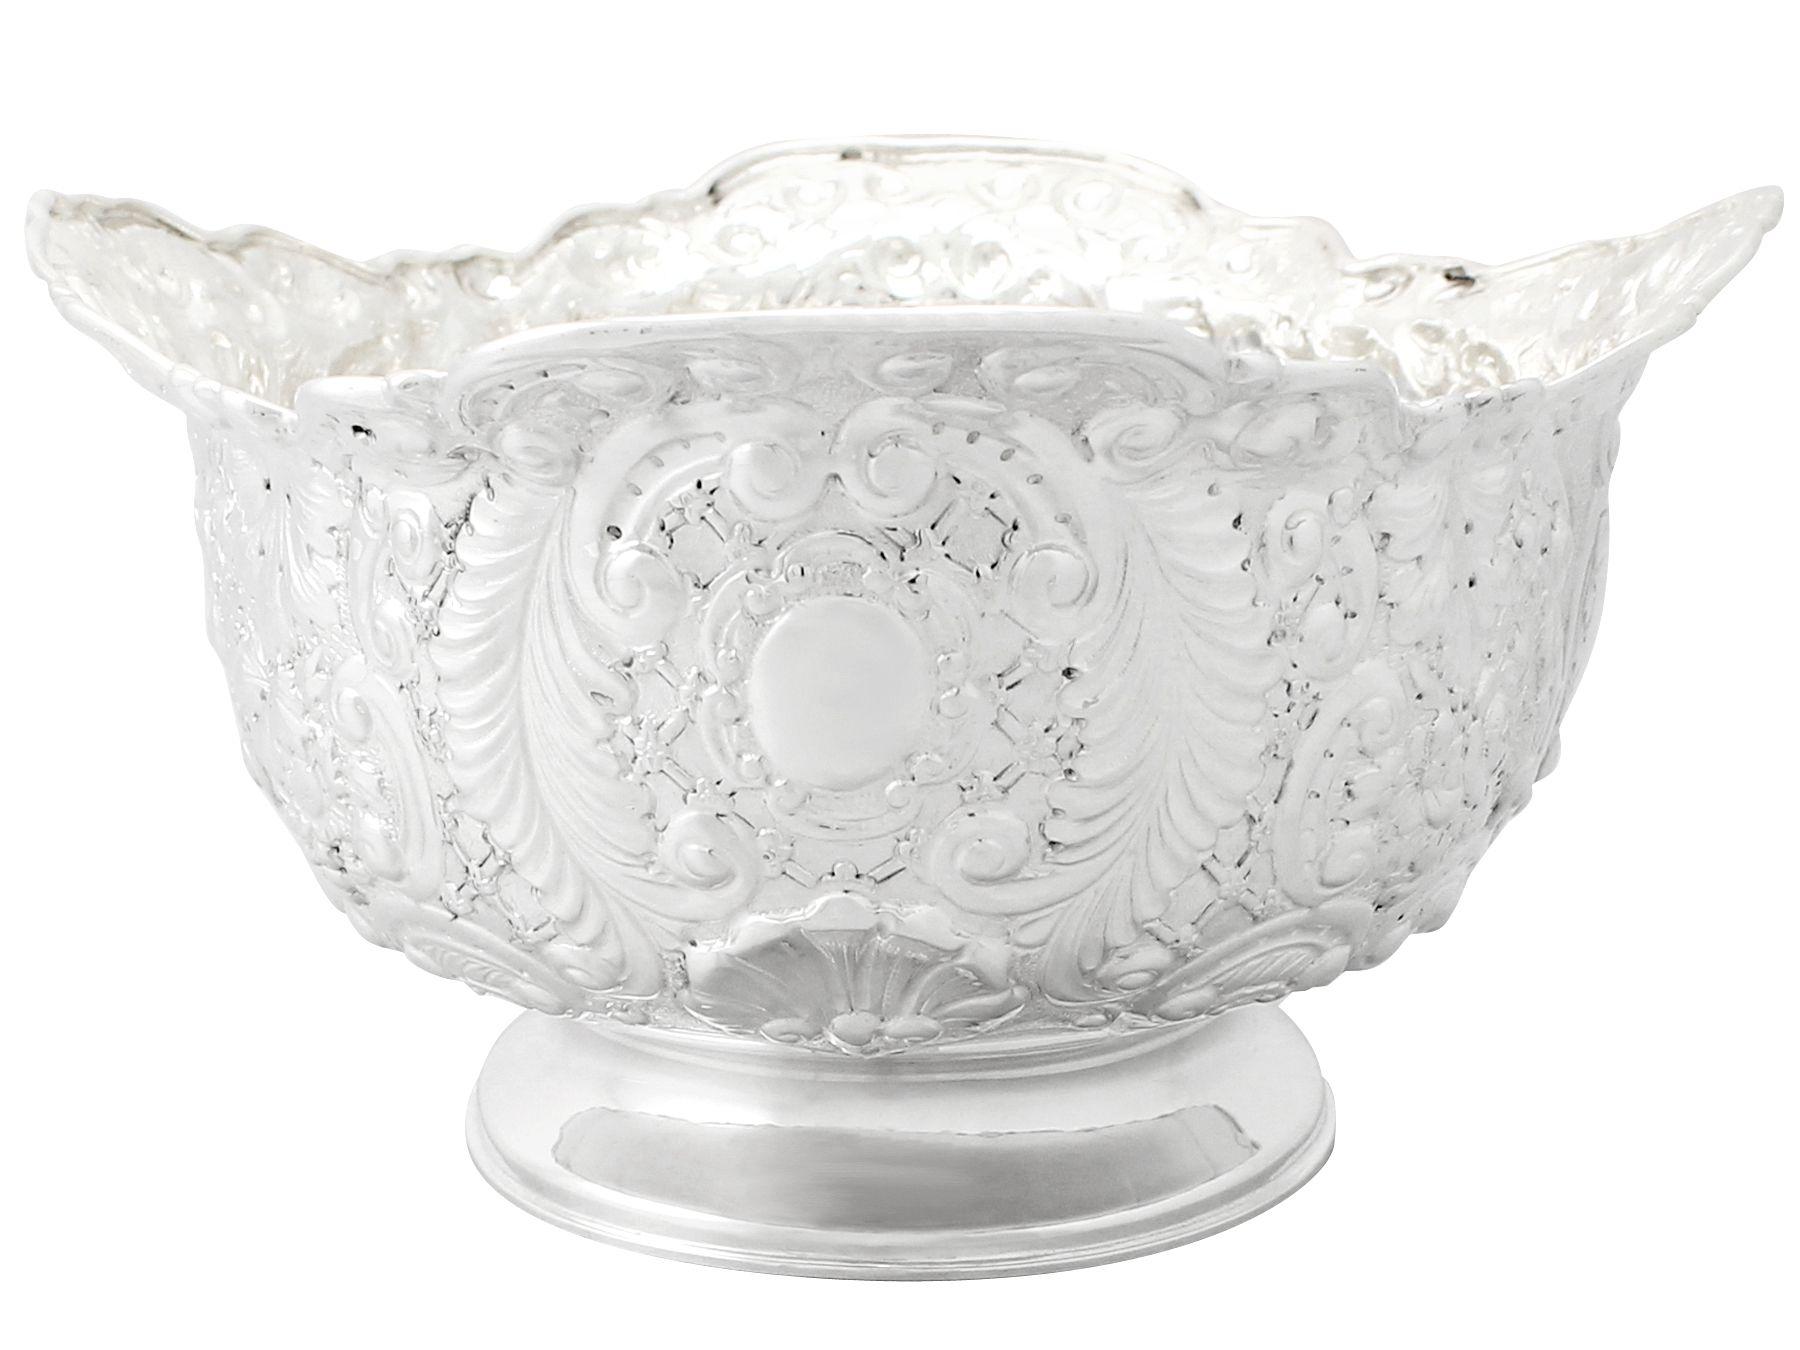 Embossed Horace Woodward & Co Victorian Sterling Silver Presentation Bowl For Sale